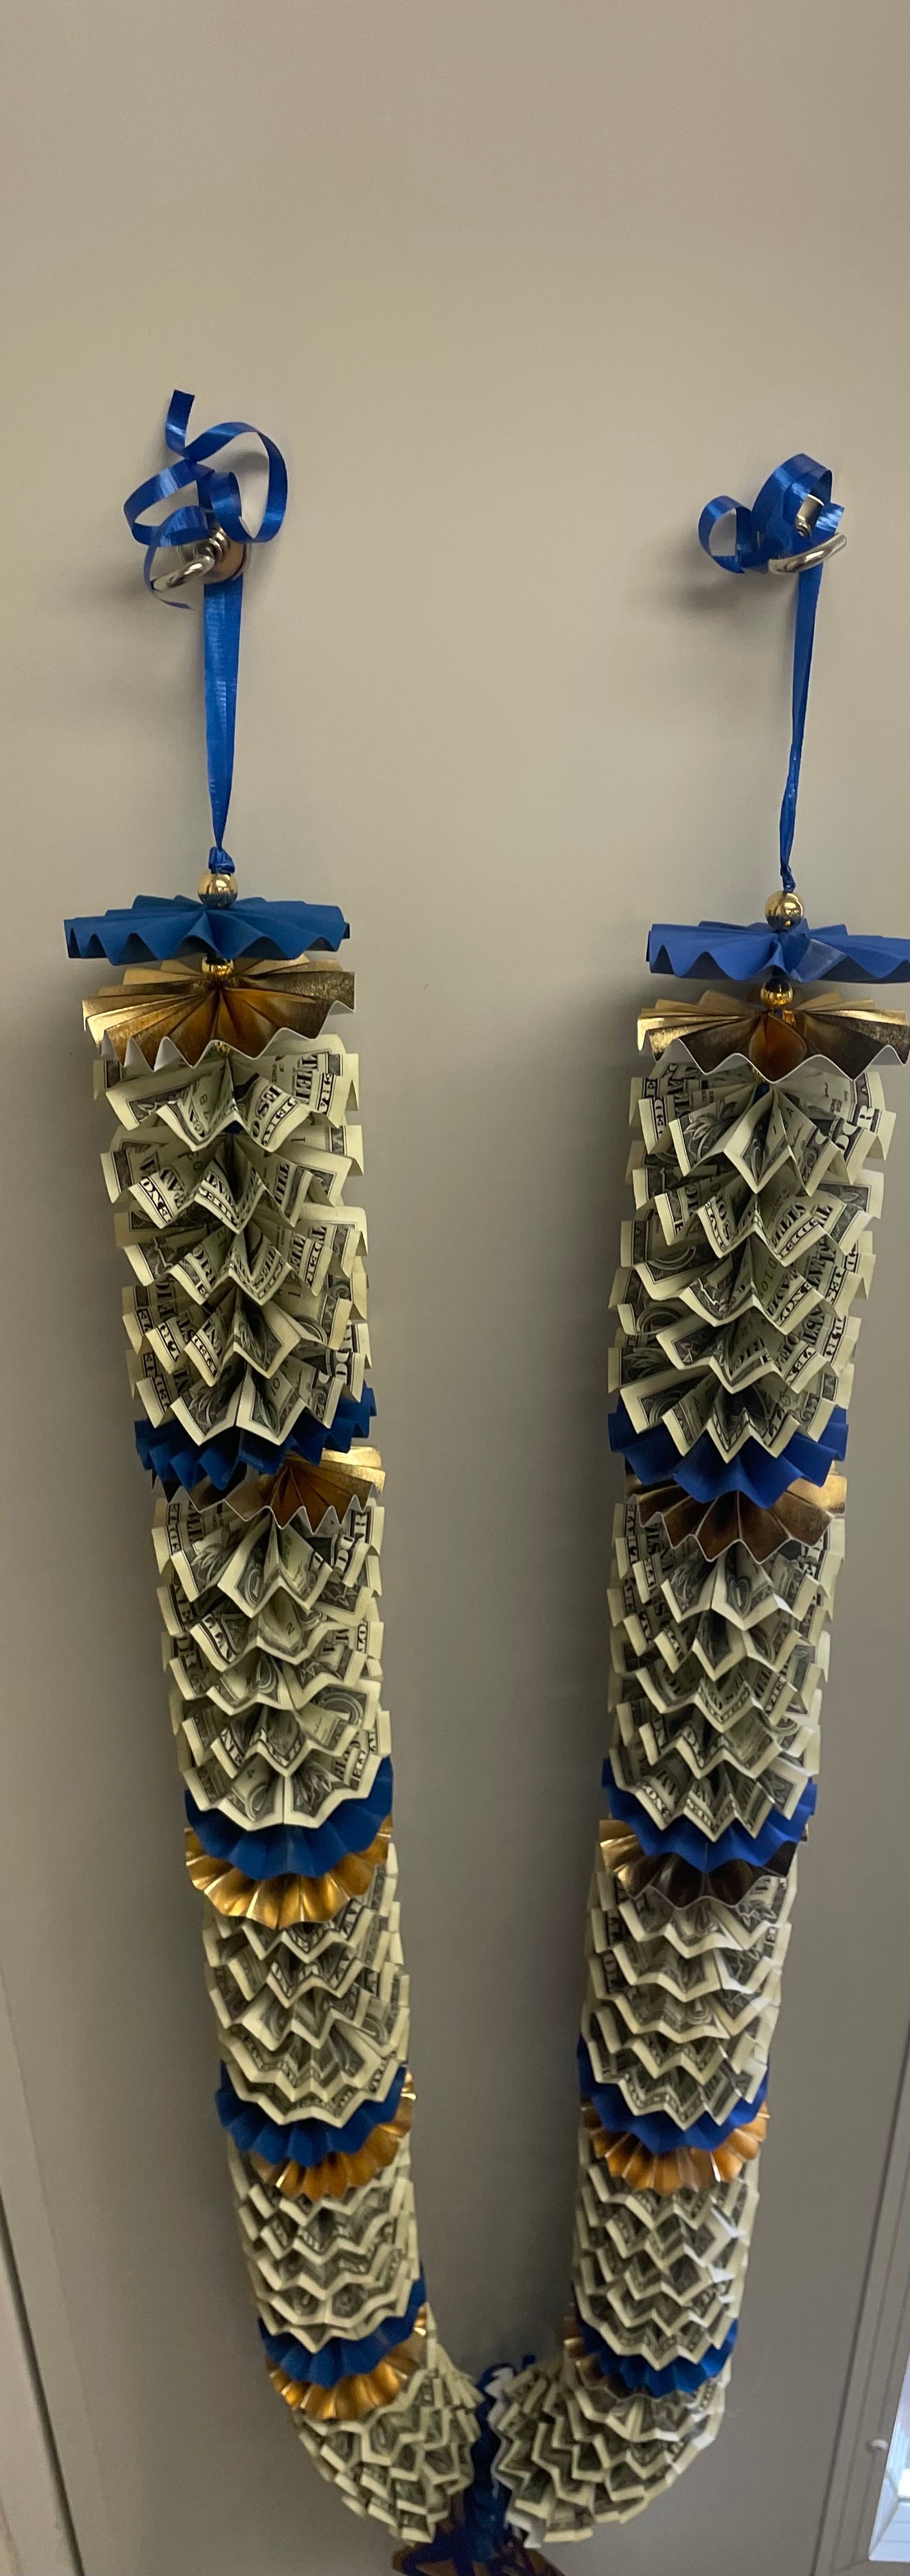 $50 in Cash Royal Blue and Gold Graduation Money Lei